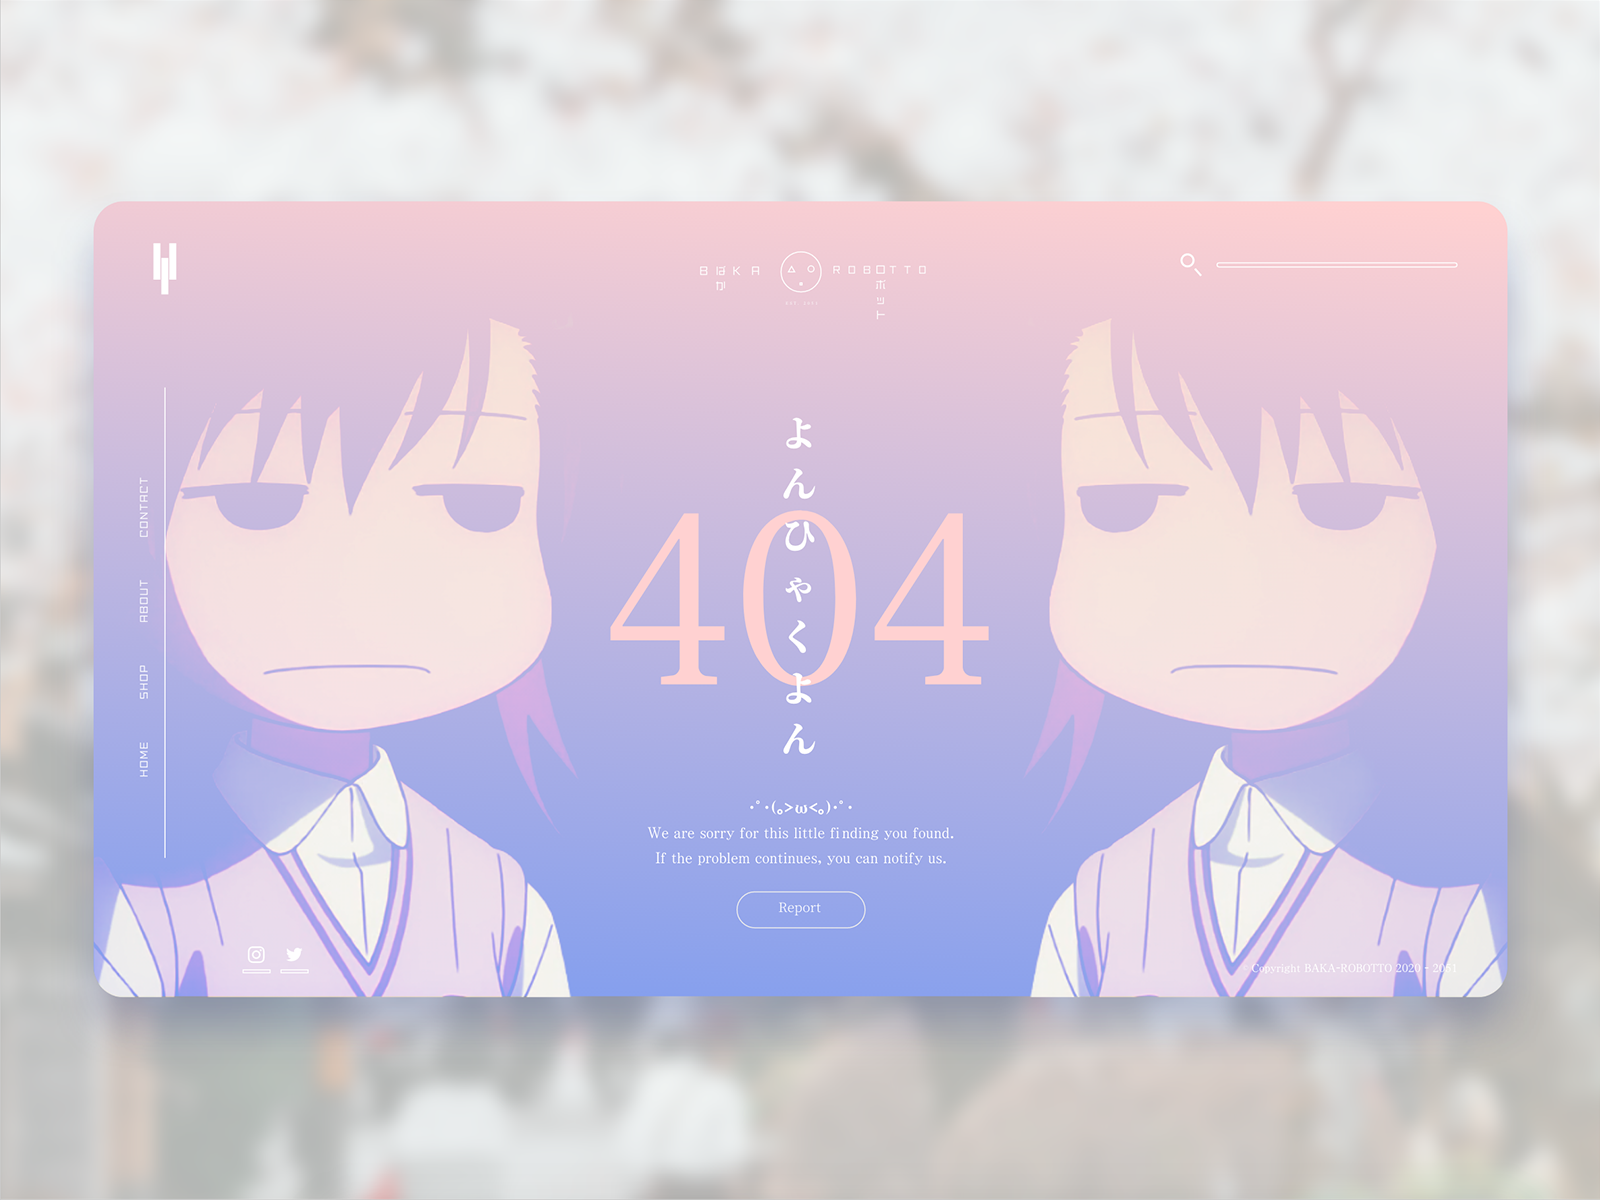 Anime 404 Error Page Concept by Tomás Aguilar on Dribbble